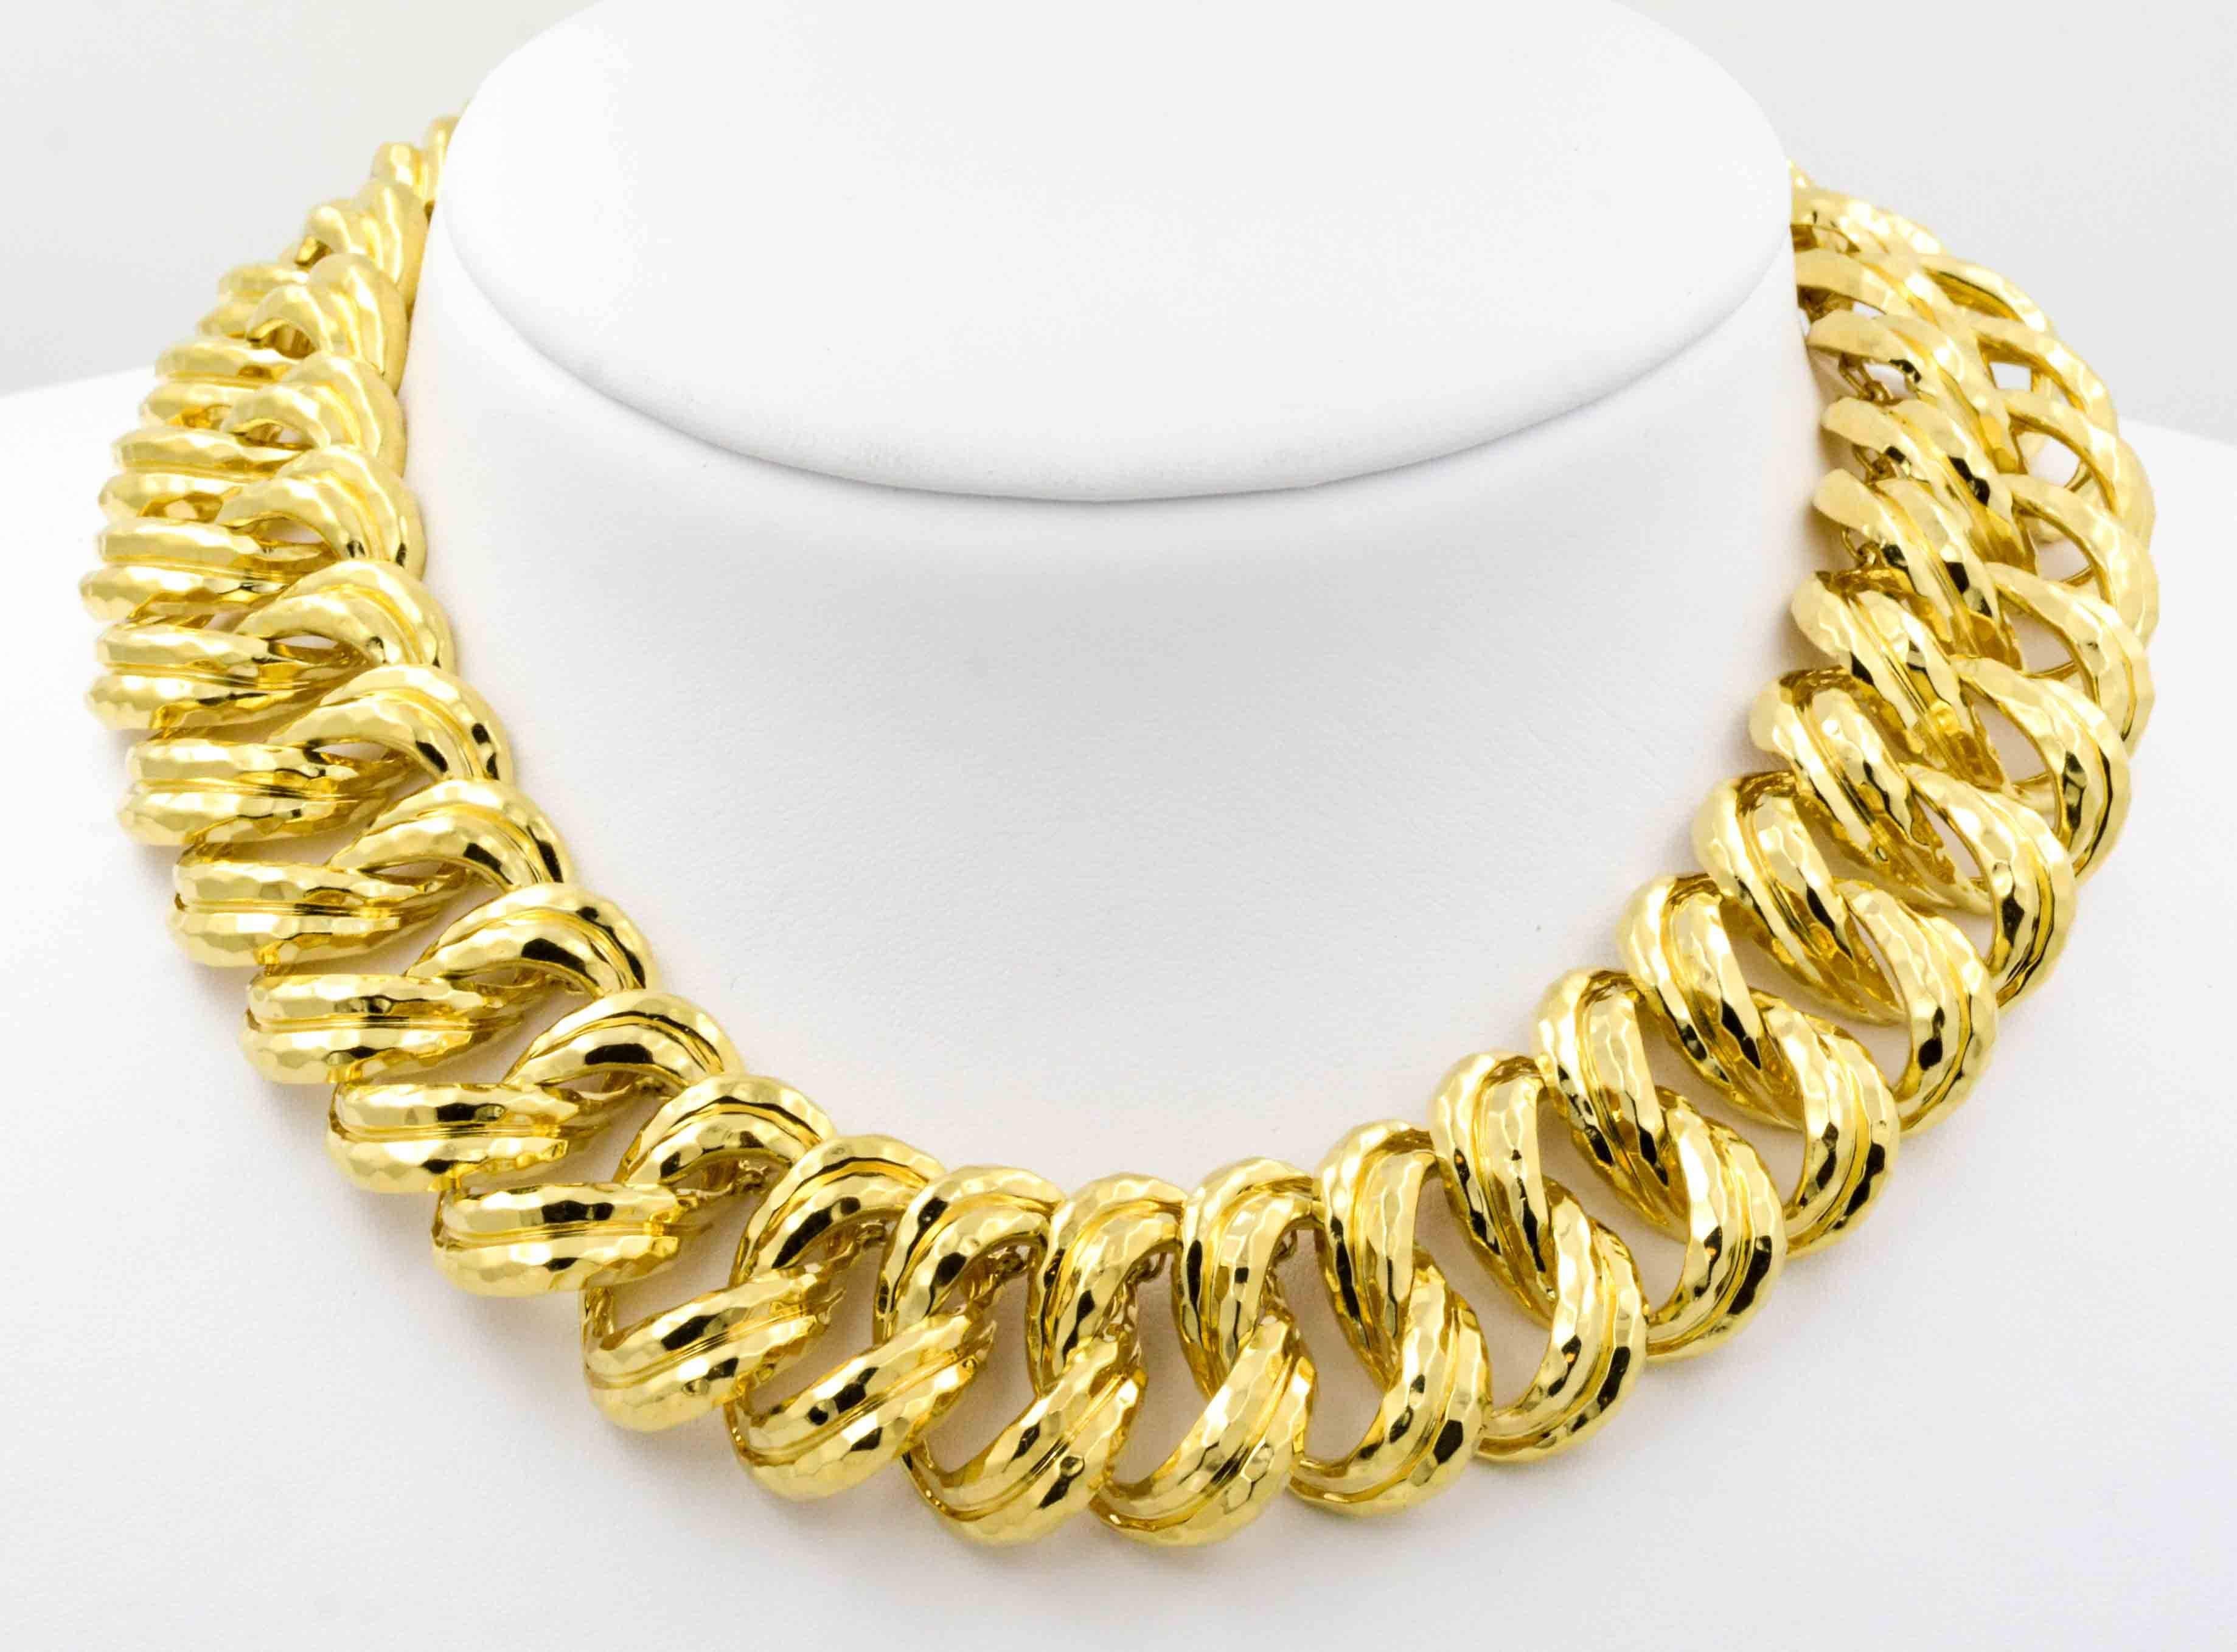 Like an amber sunset glowing in the evening, this 18 kt yellow gold necklace ripples of gold adding an upscale touch to the neckline. Created by Henry Dunay in his signature bold 18 kt gold style, the facets of this necklace are both intriguing as